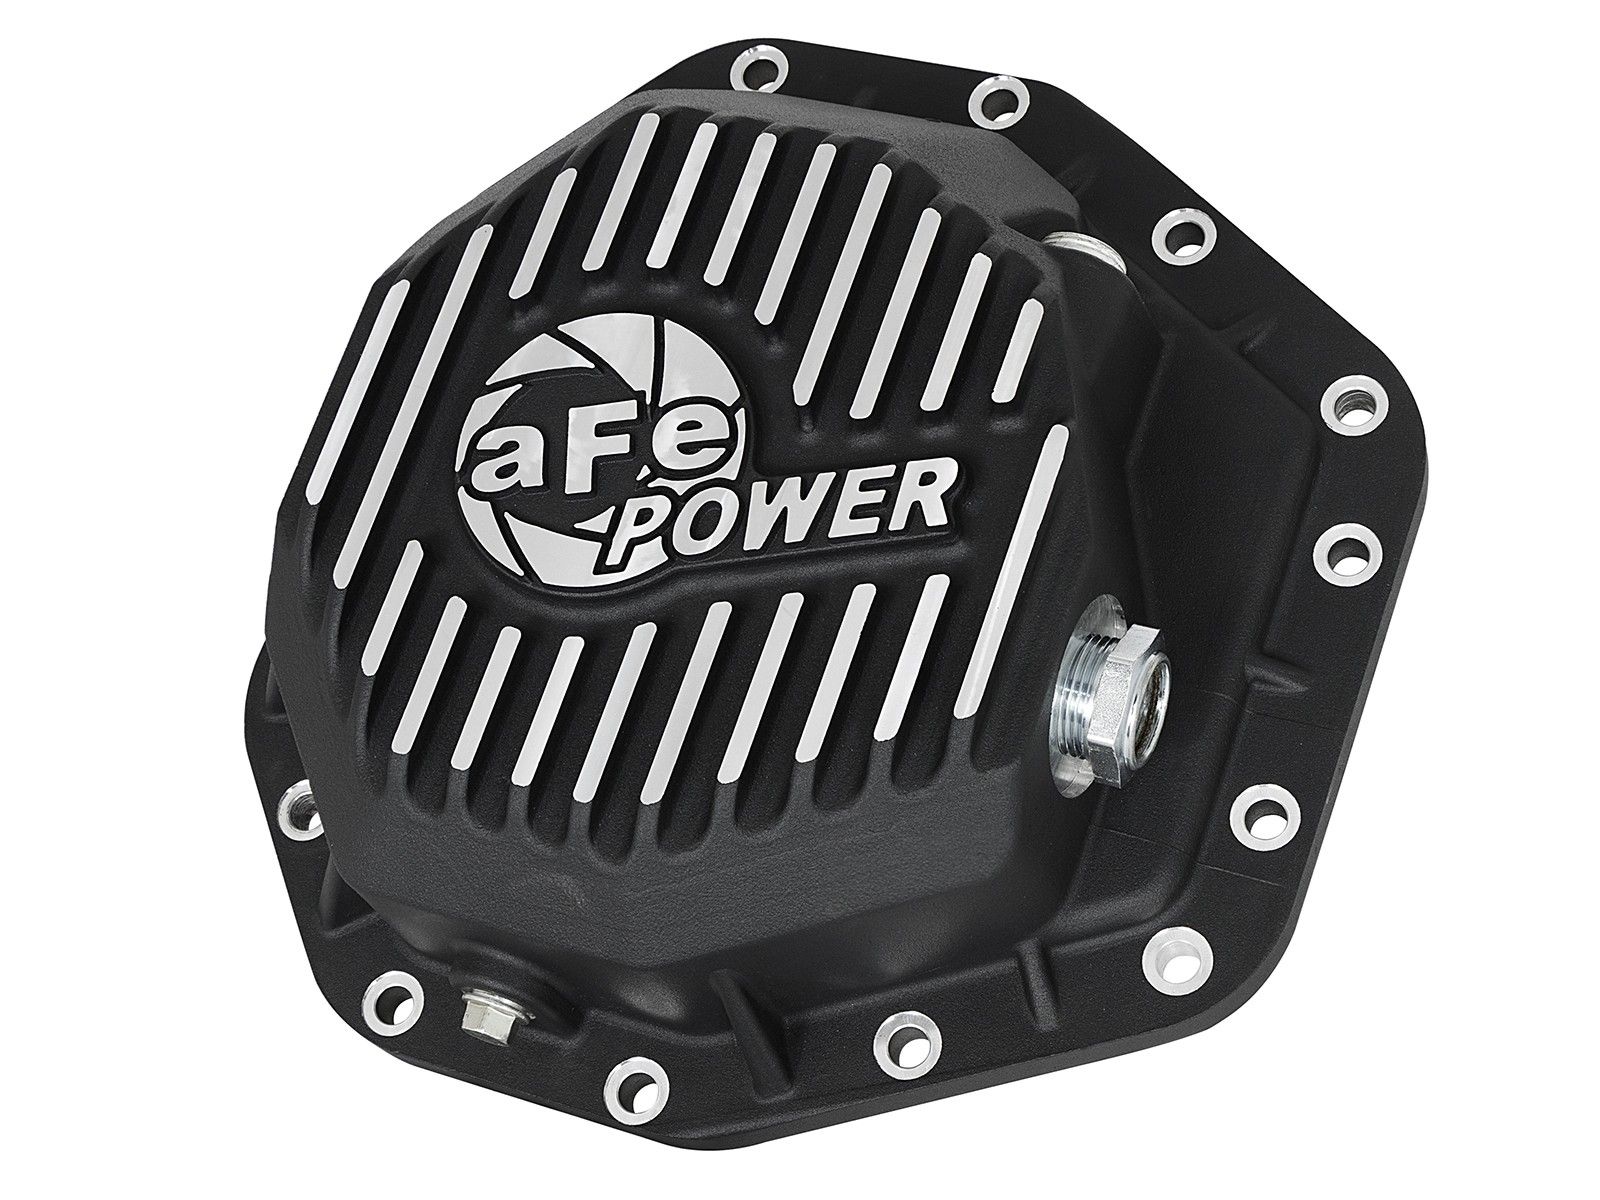 2017-2019 Ford F-350 Super Duty Turbo Diesel V8 6.7L Rear Differential Cover Machined Fins Pro Series - 46-70352